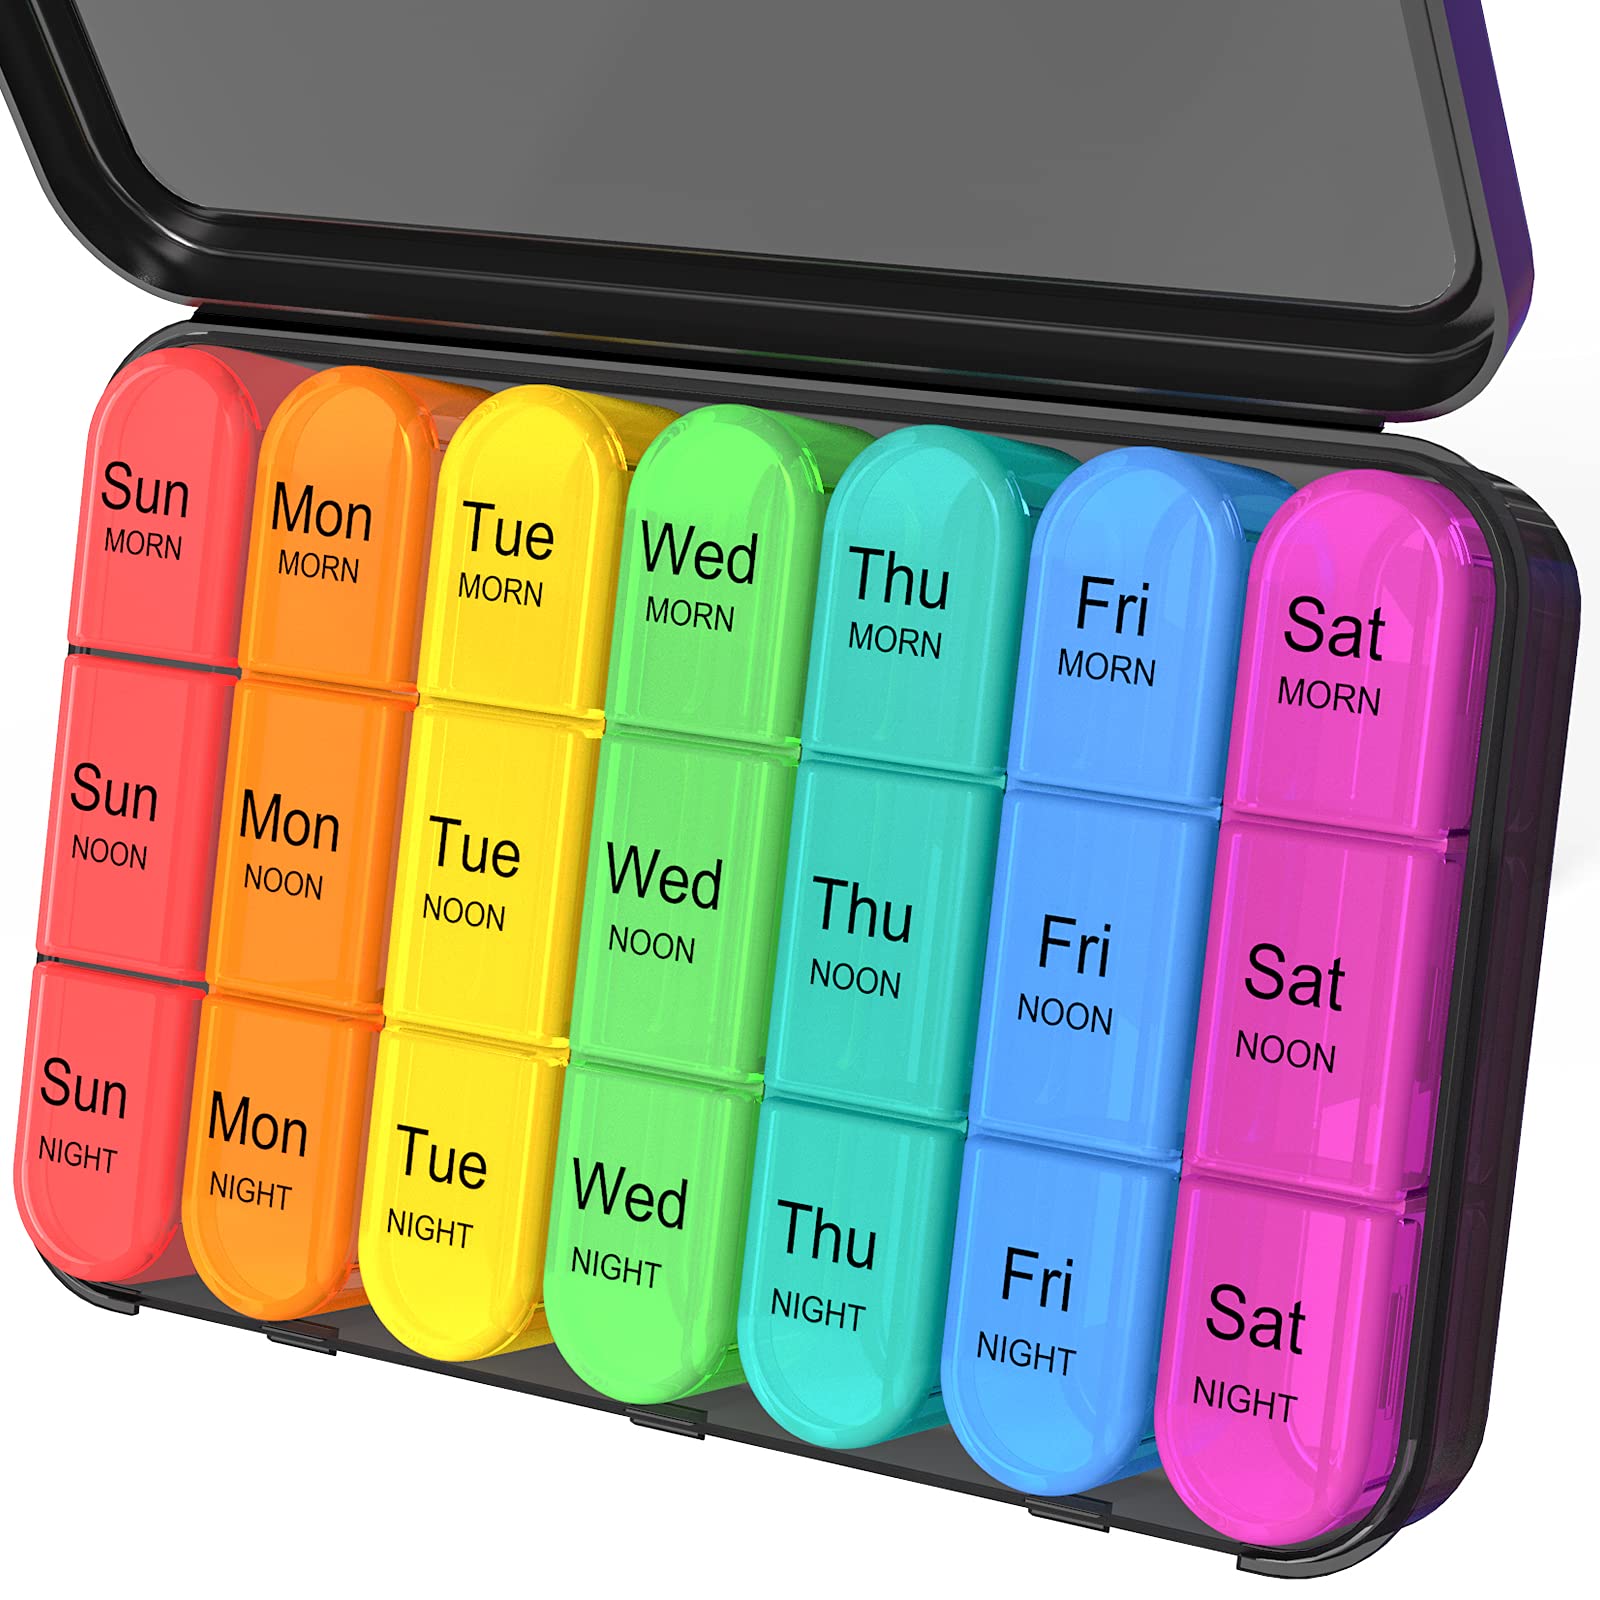 Weekly Travel Pill Organizer 4 Times With Leather Purse - 2 Pack